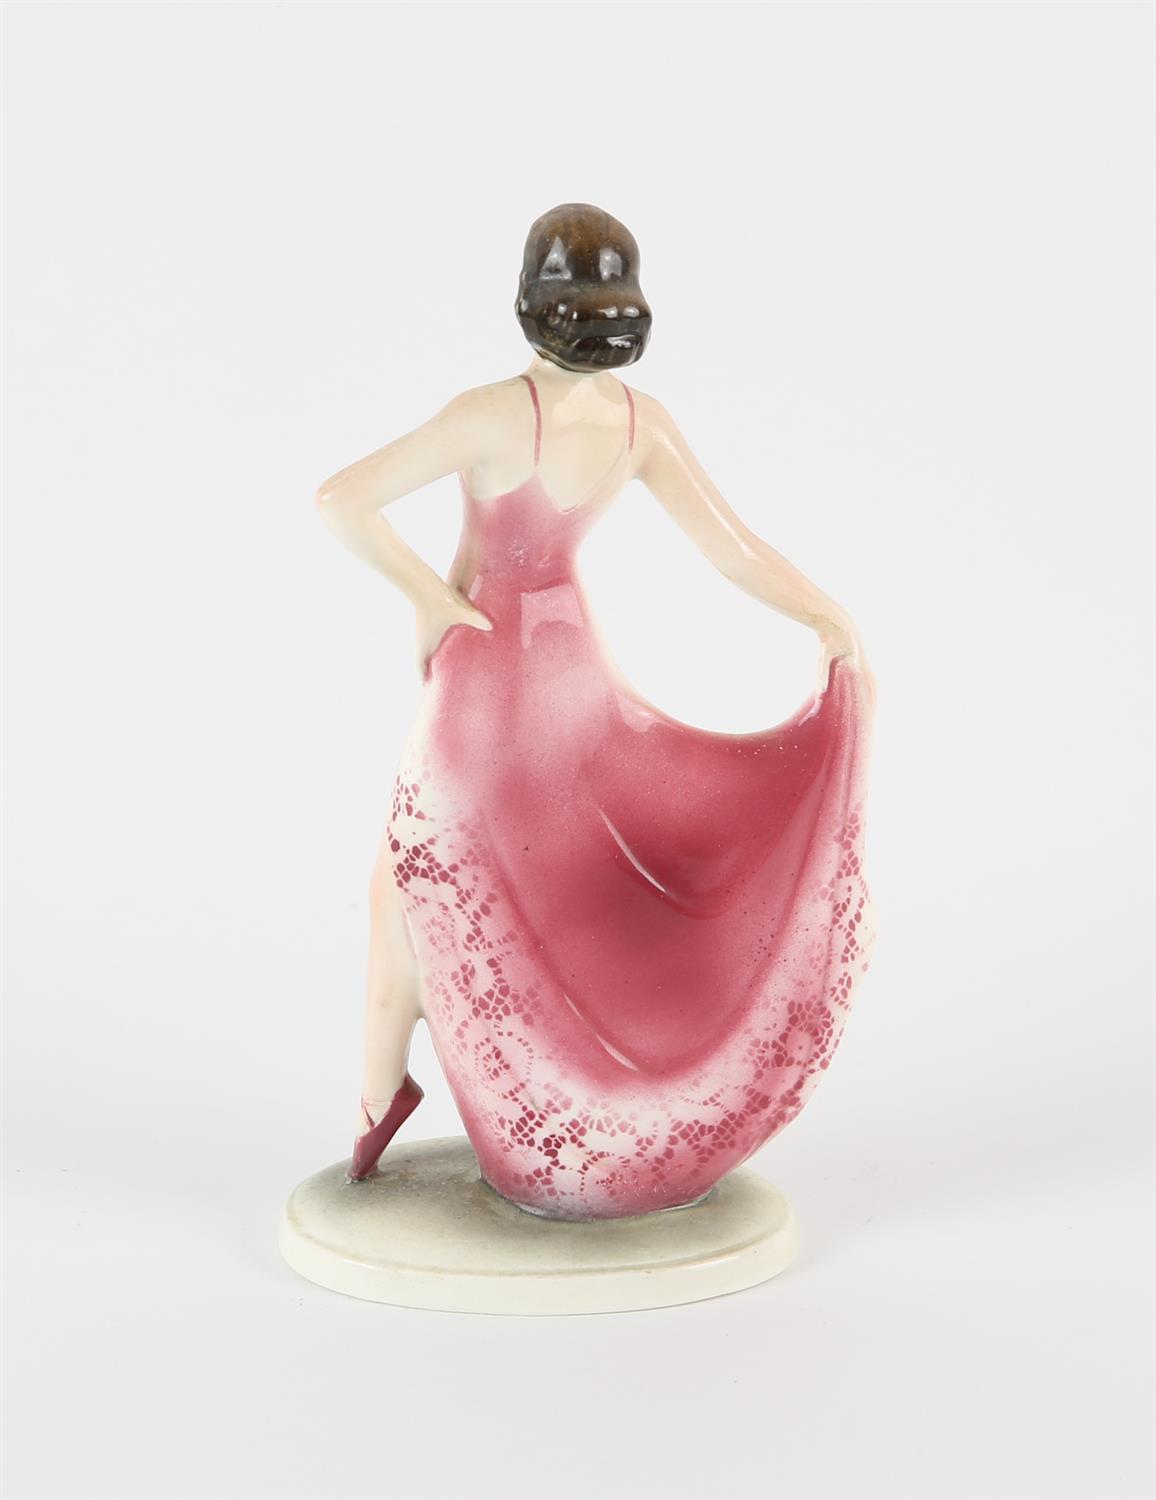 IN THE MANNER OF KATZHUTTE, a pottery figure of a dancing lady, wearing a pink and white dress, - Image 2 of 3